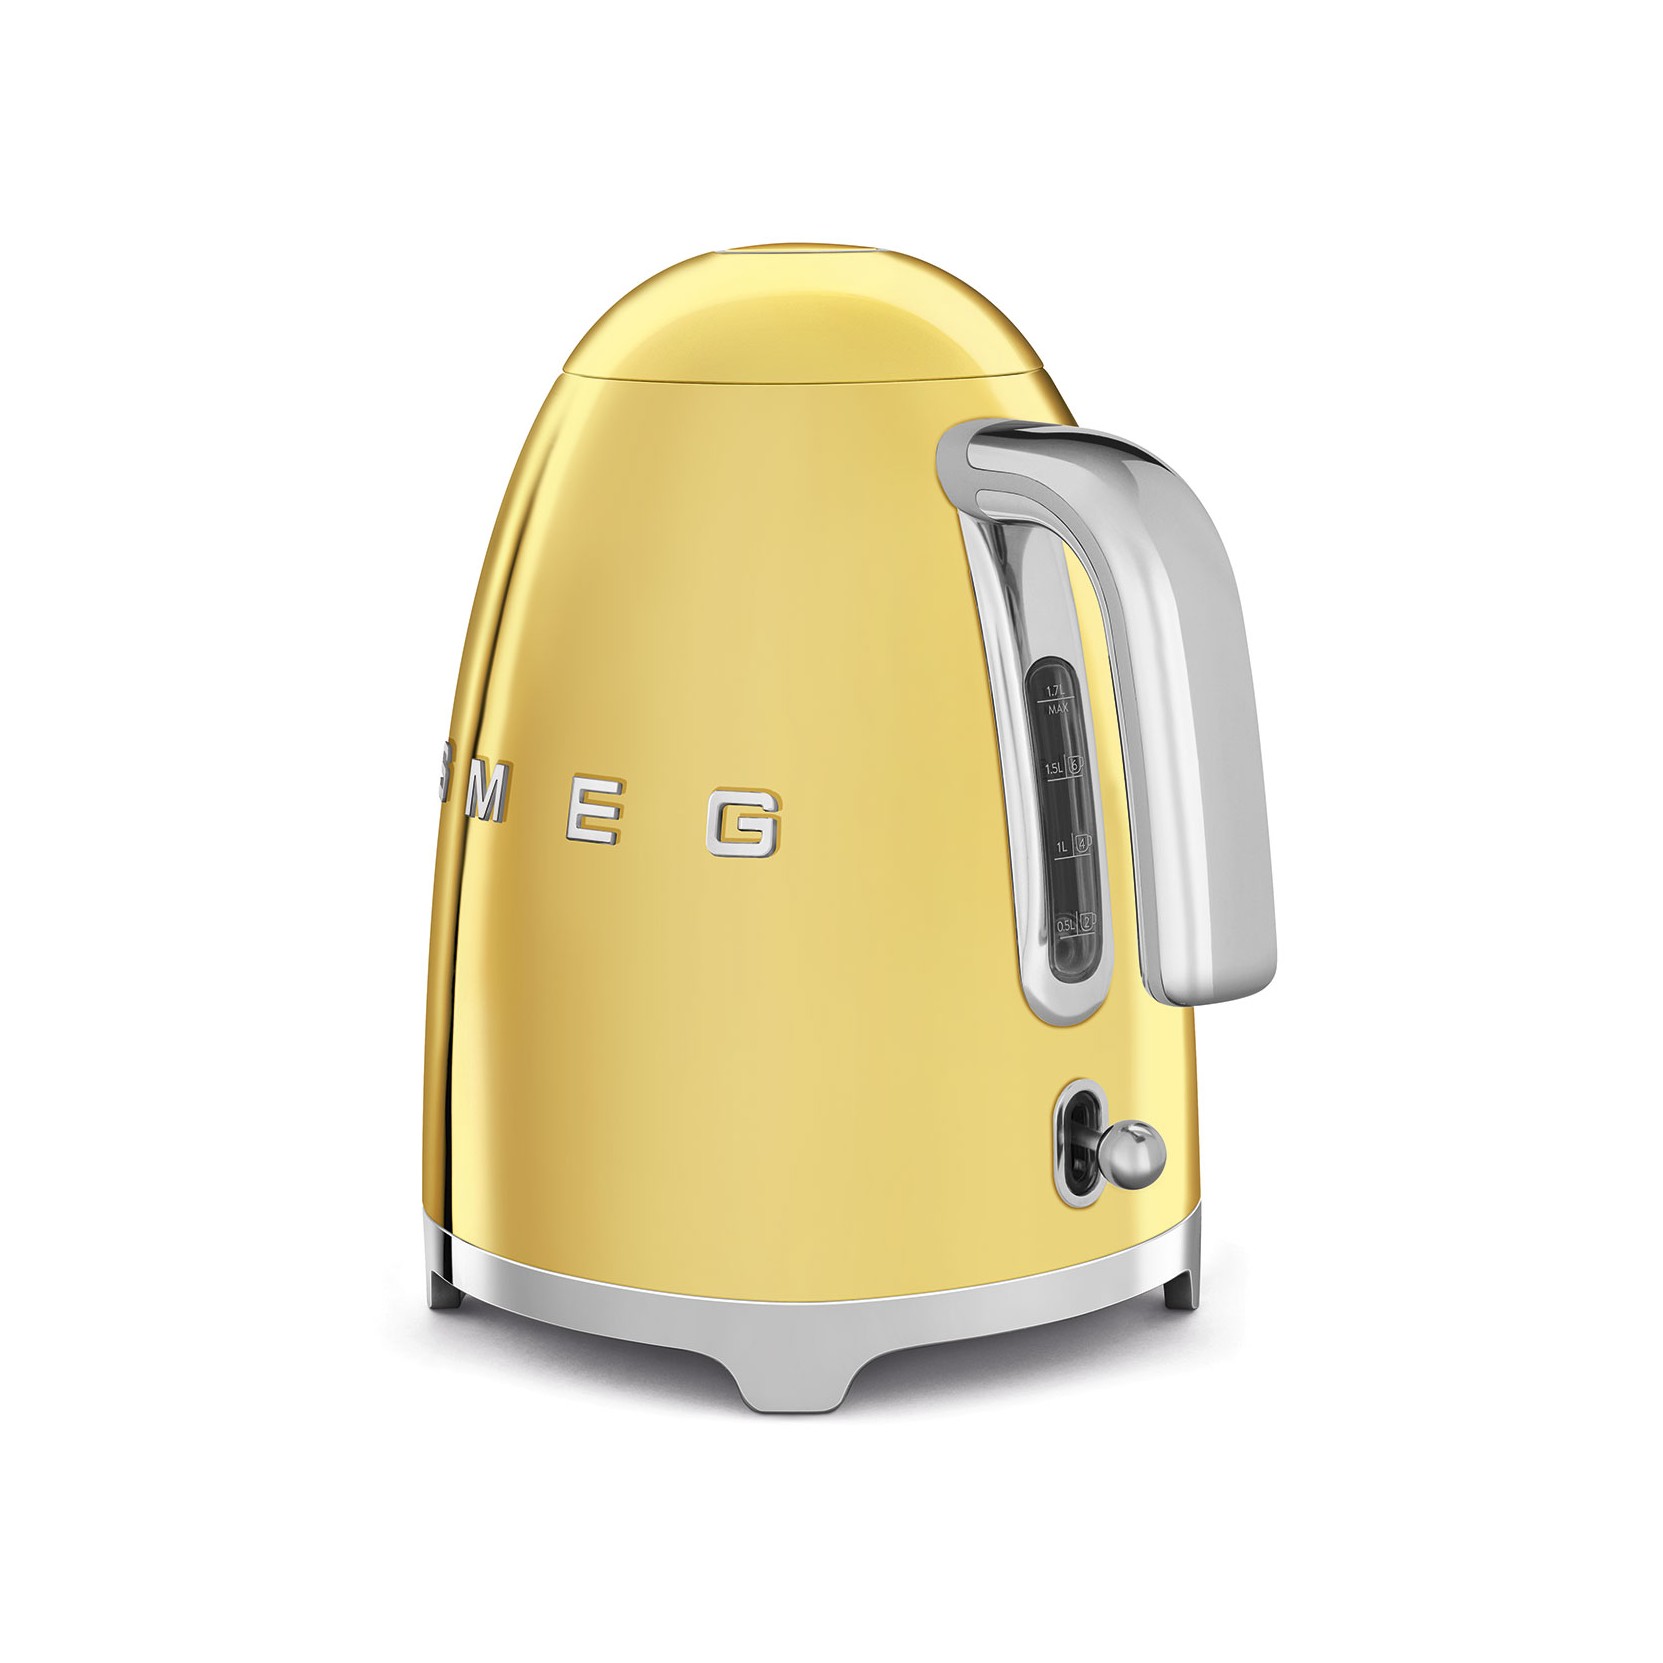 Choosing the Smeg kettle right for you 